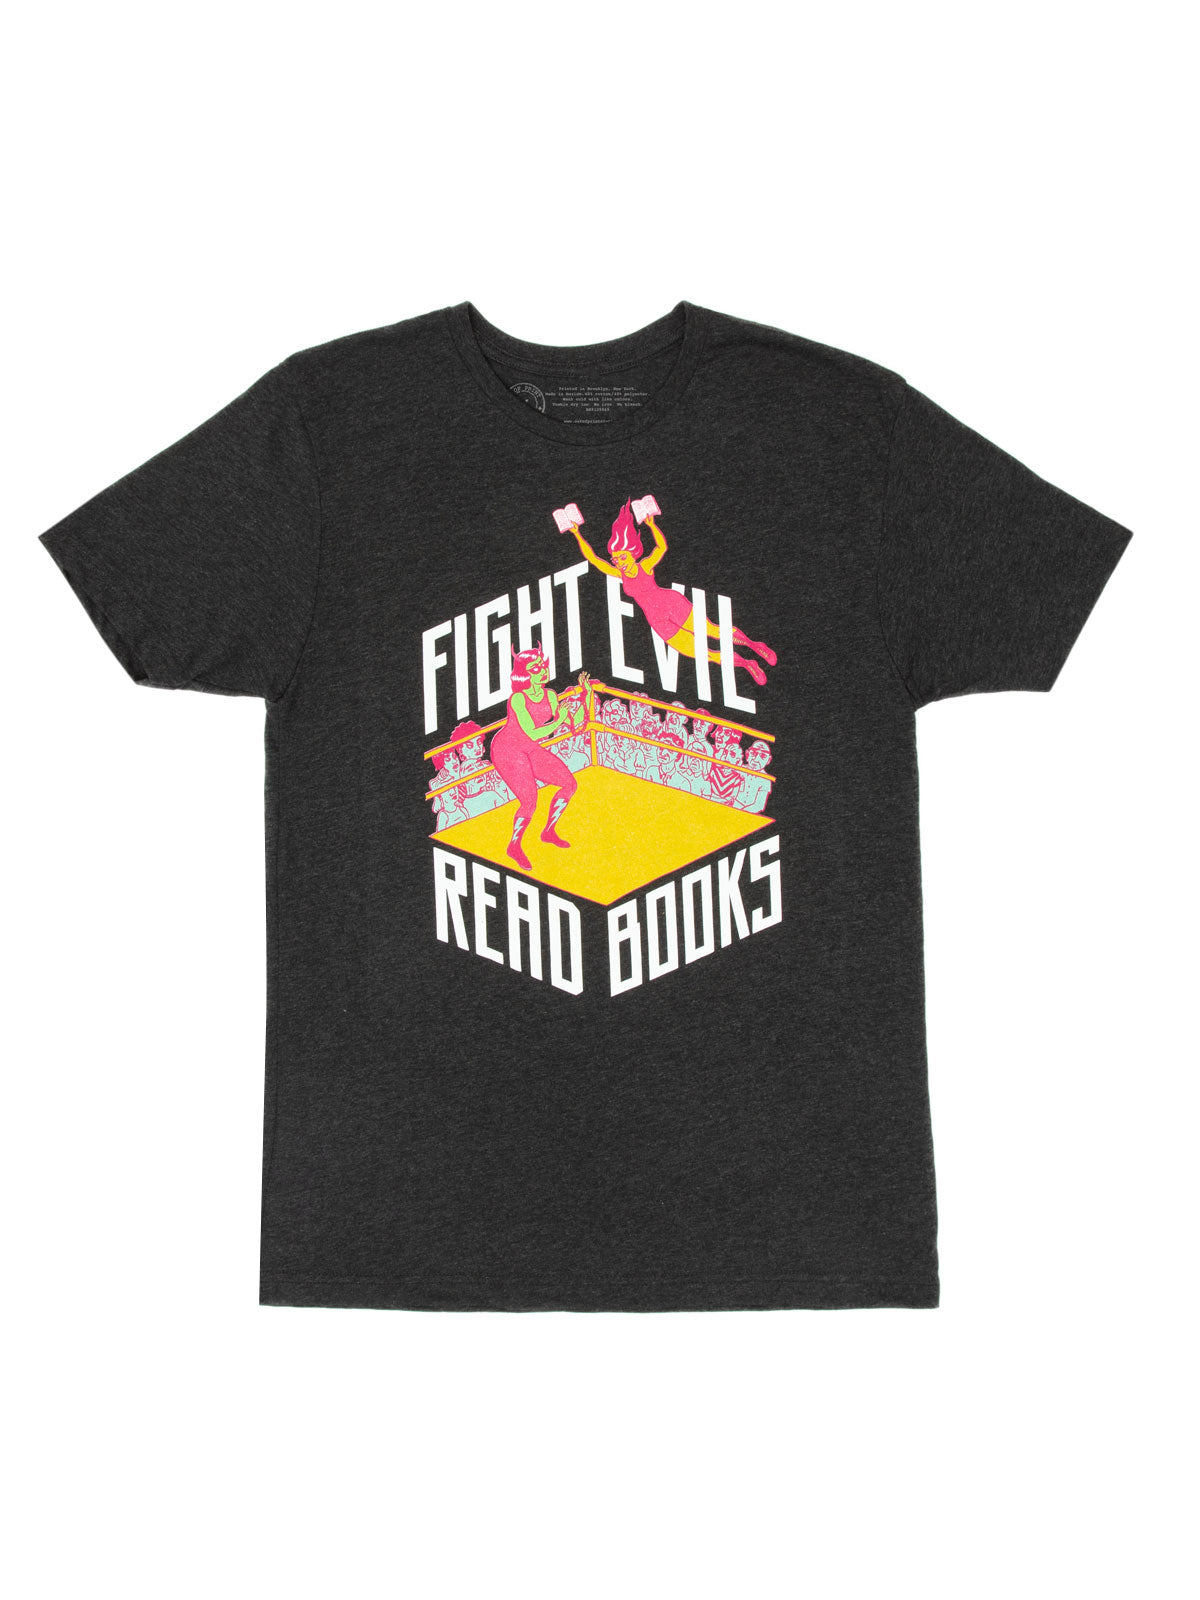 t-shirt — of Fight Books 2019 unisex Print Read Out Evil